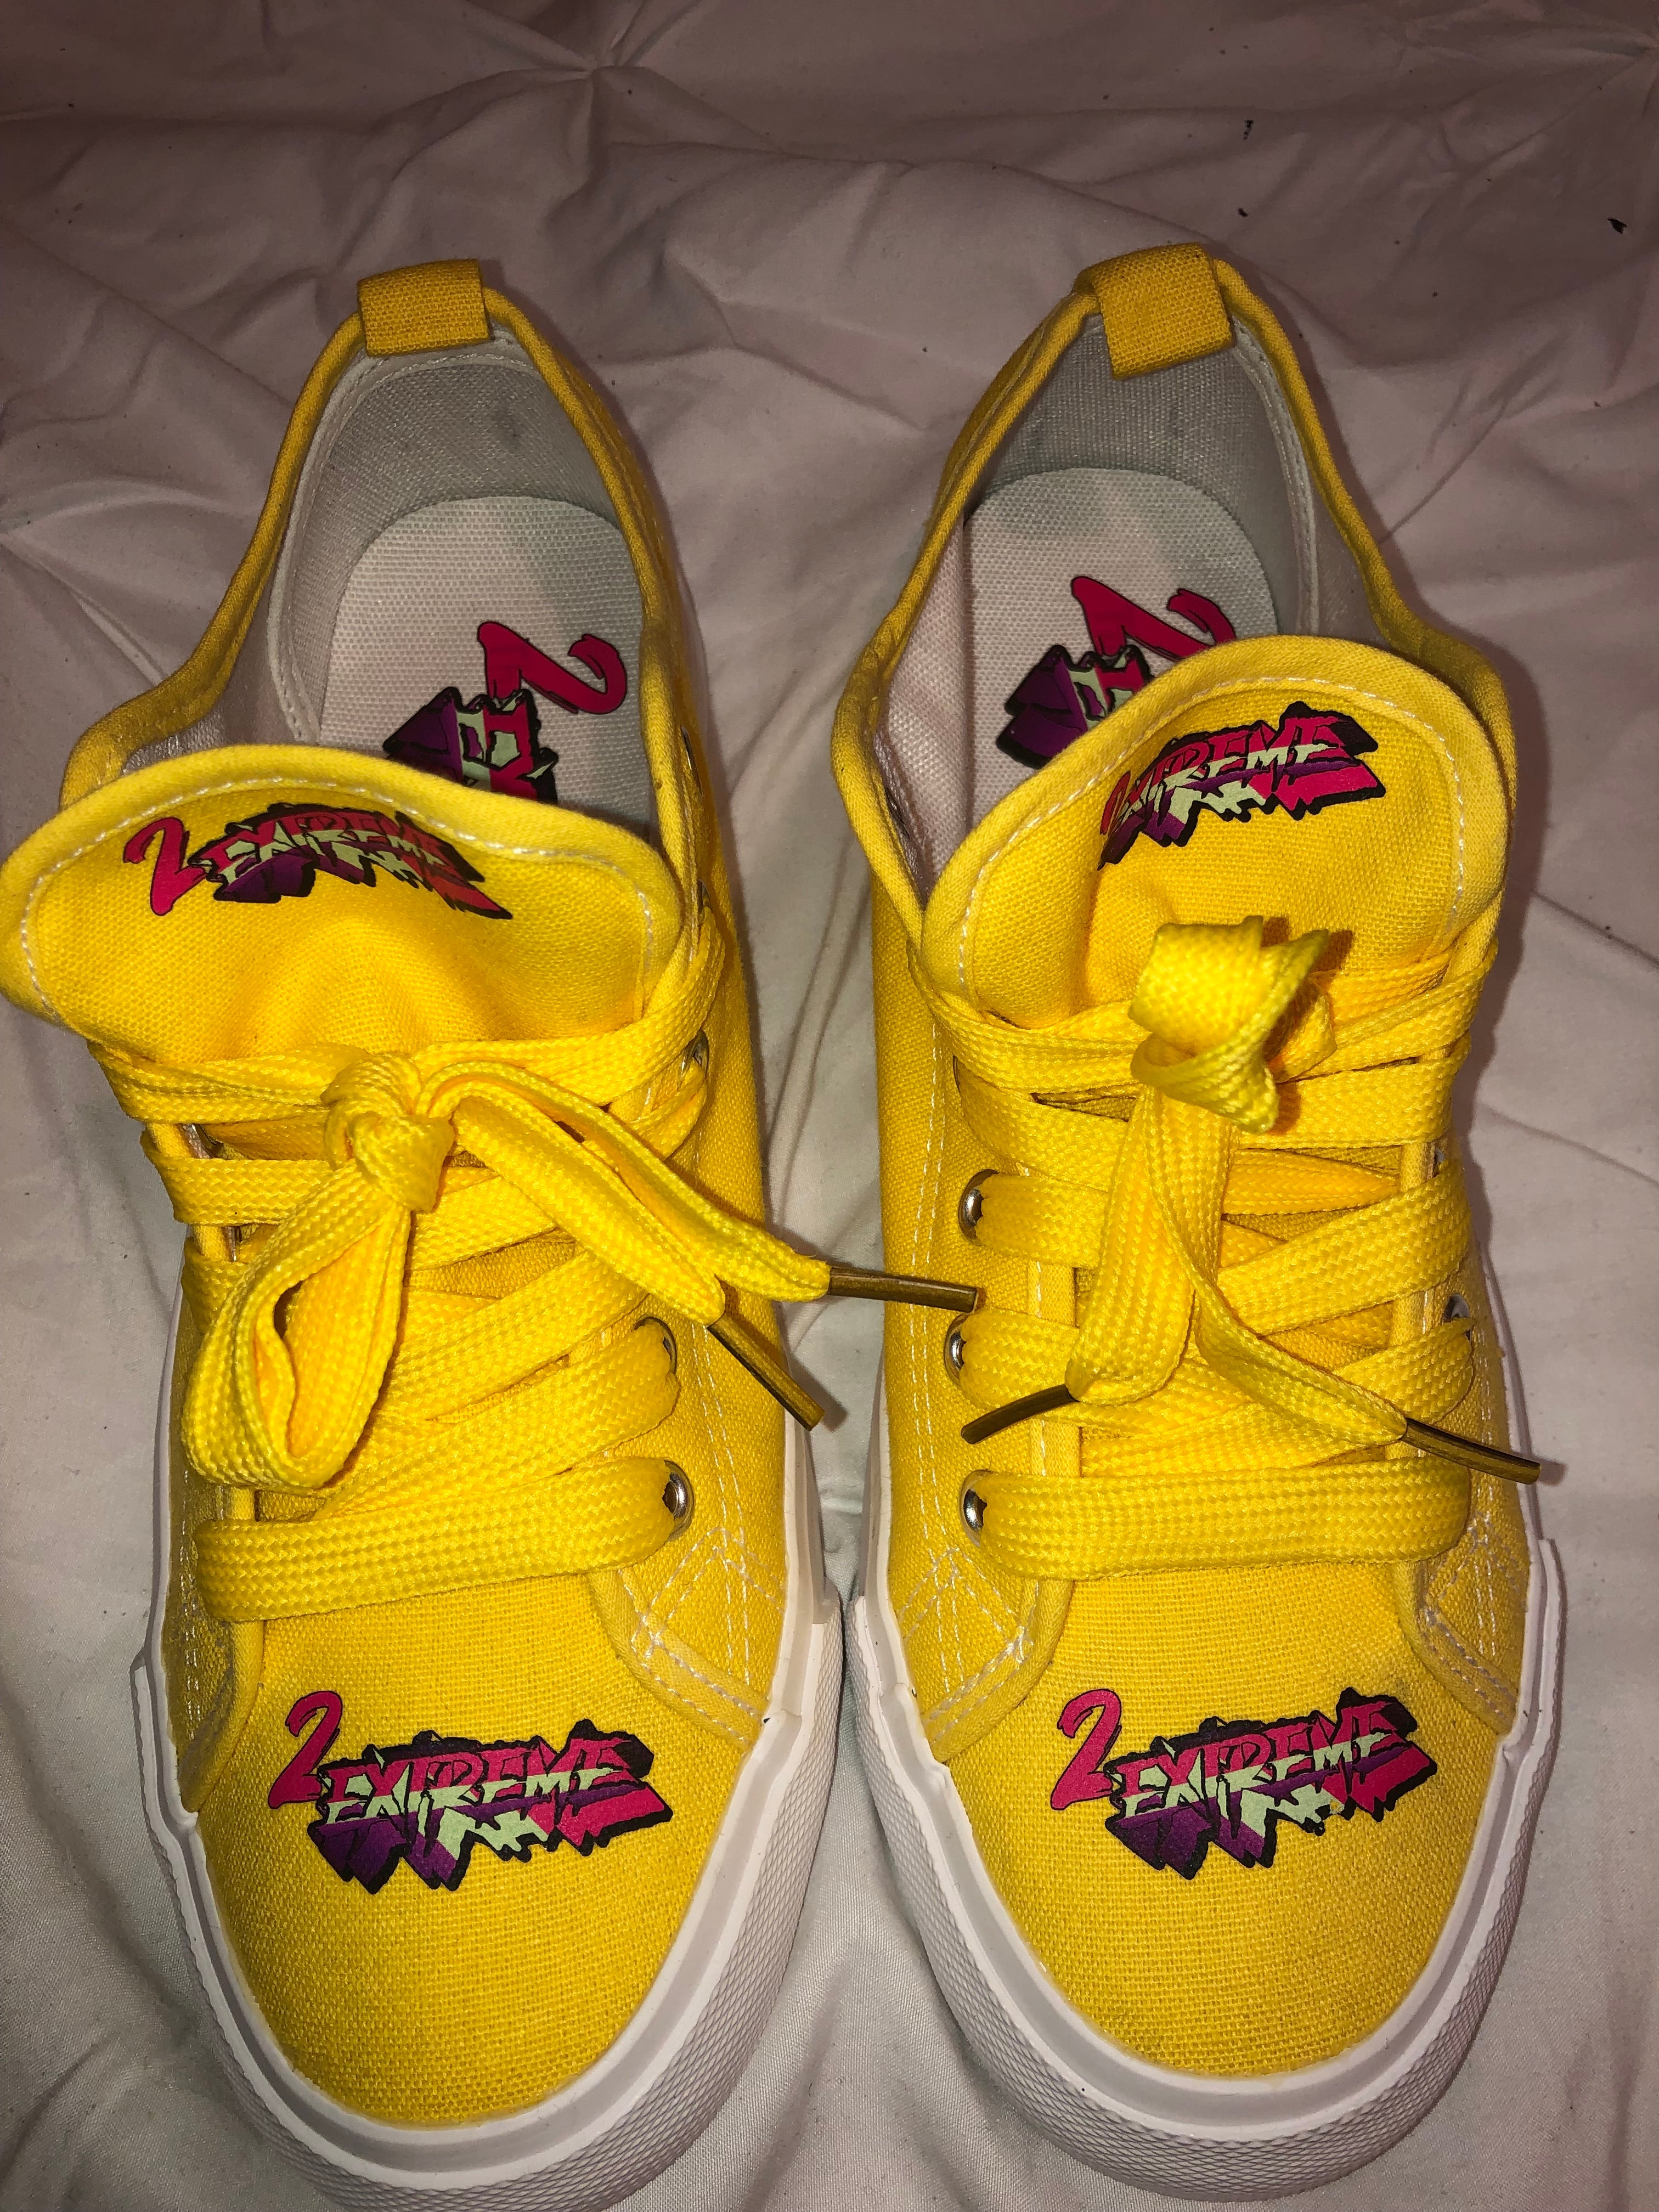 2Extreme Canvas Sneakers Yellow